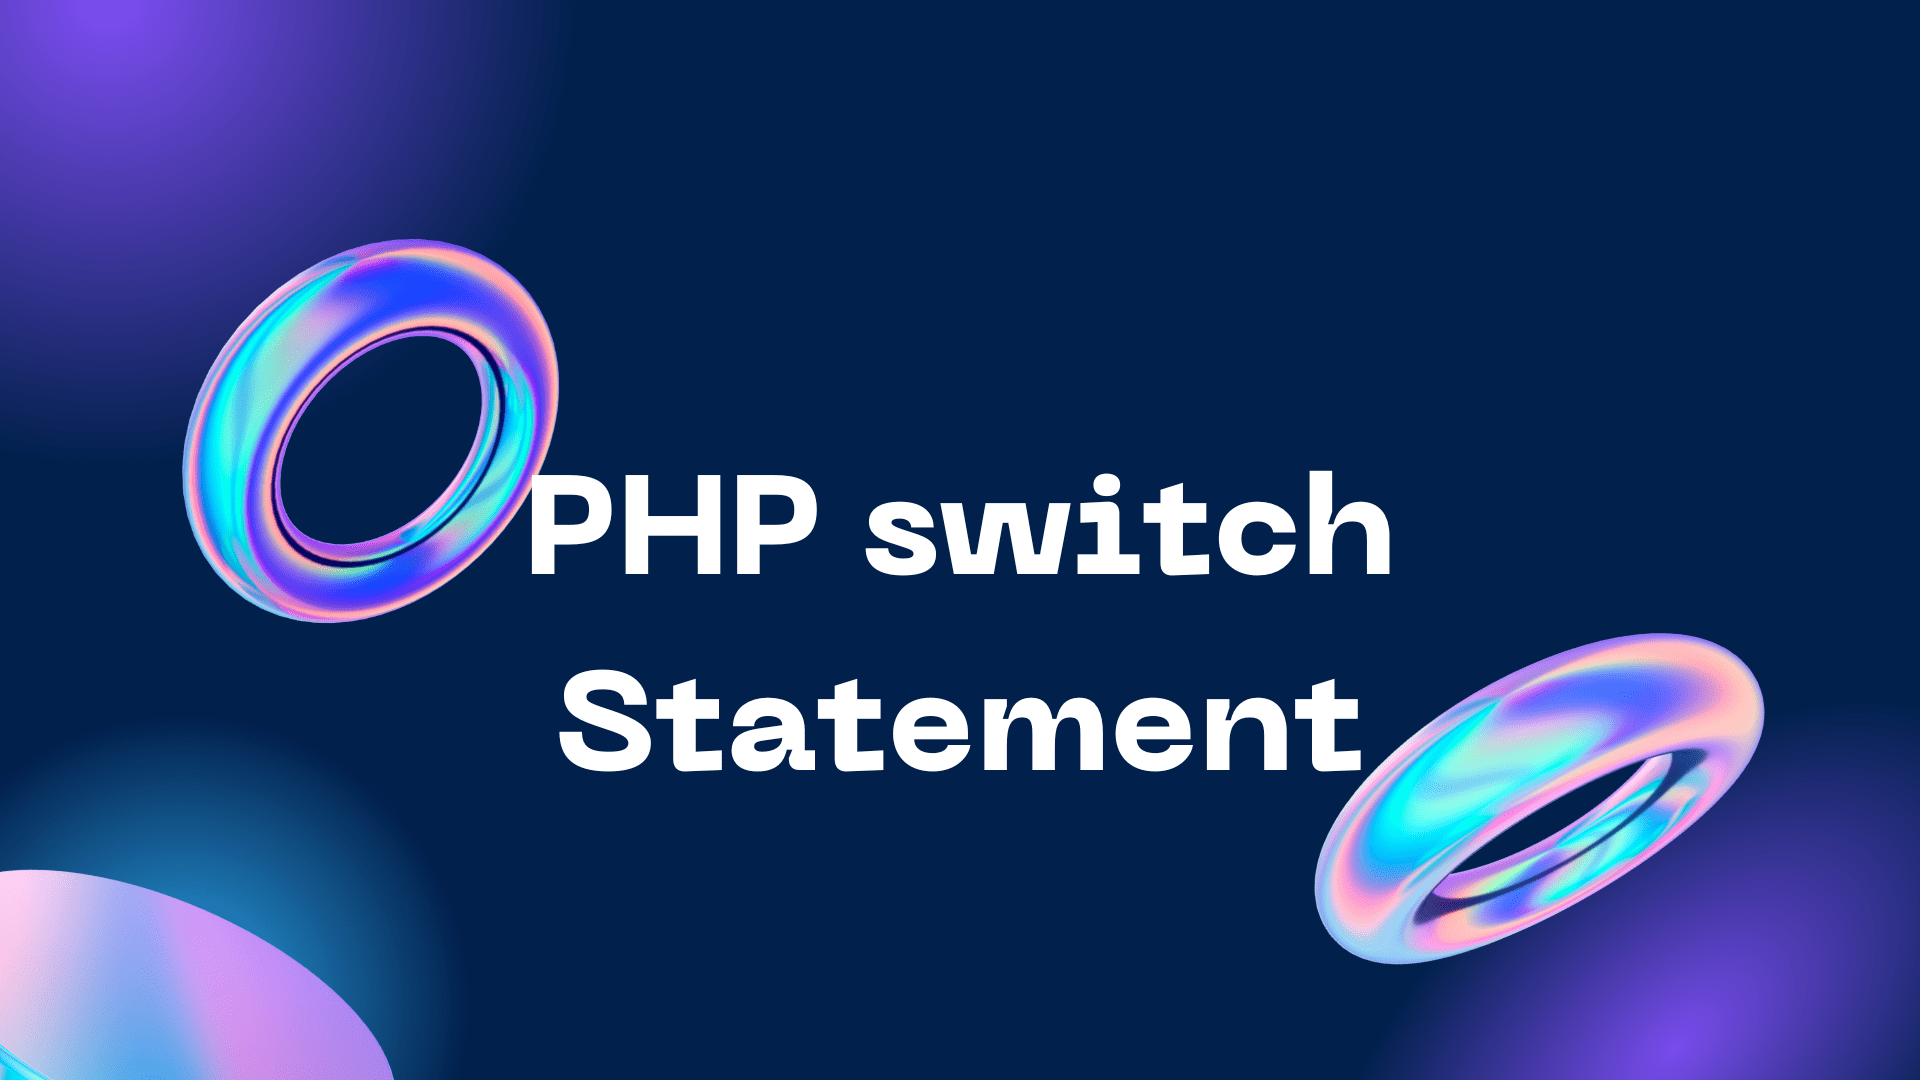 PHP switch Statement